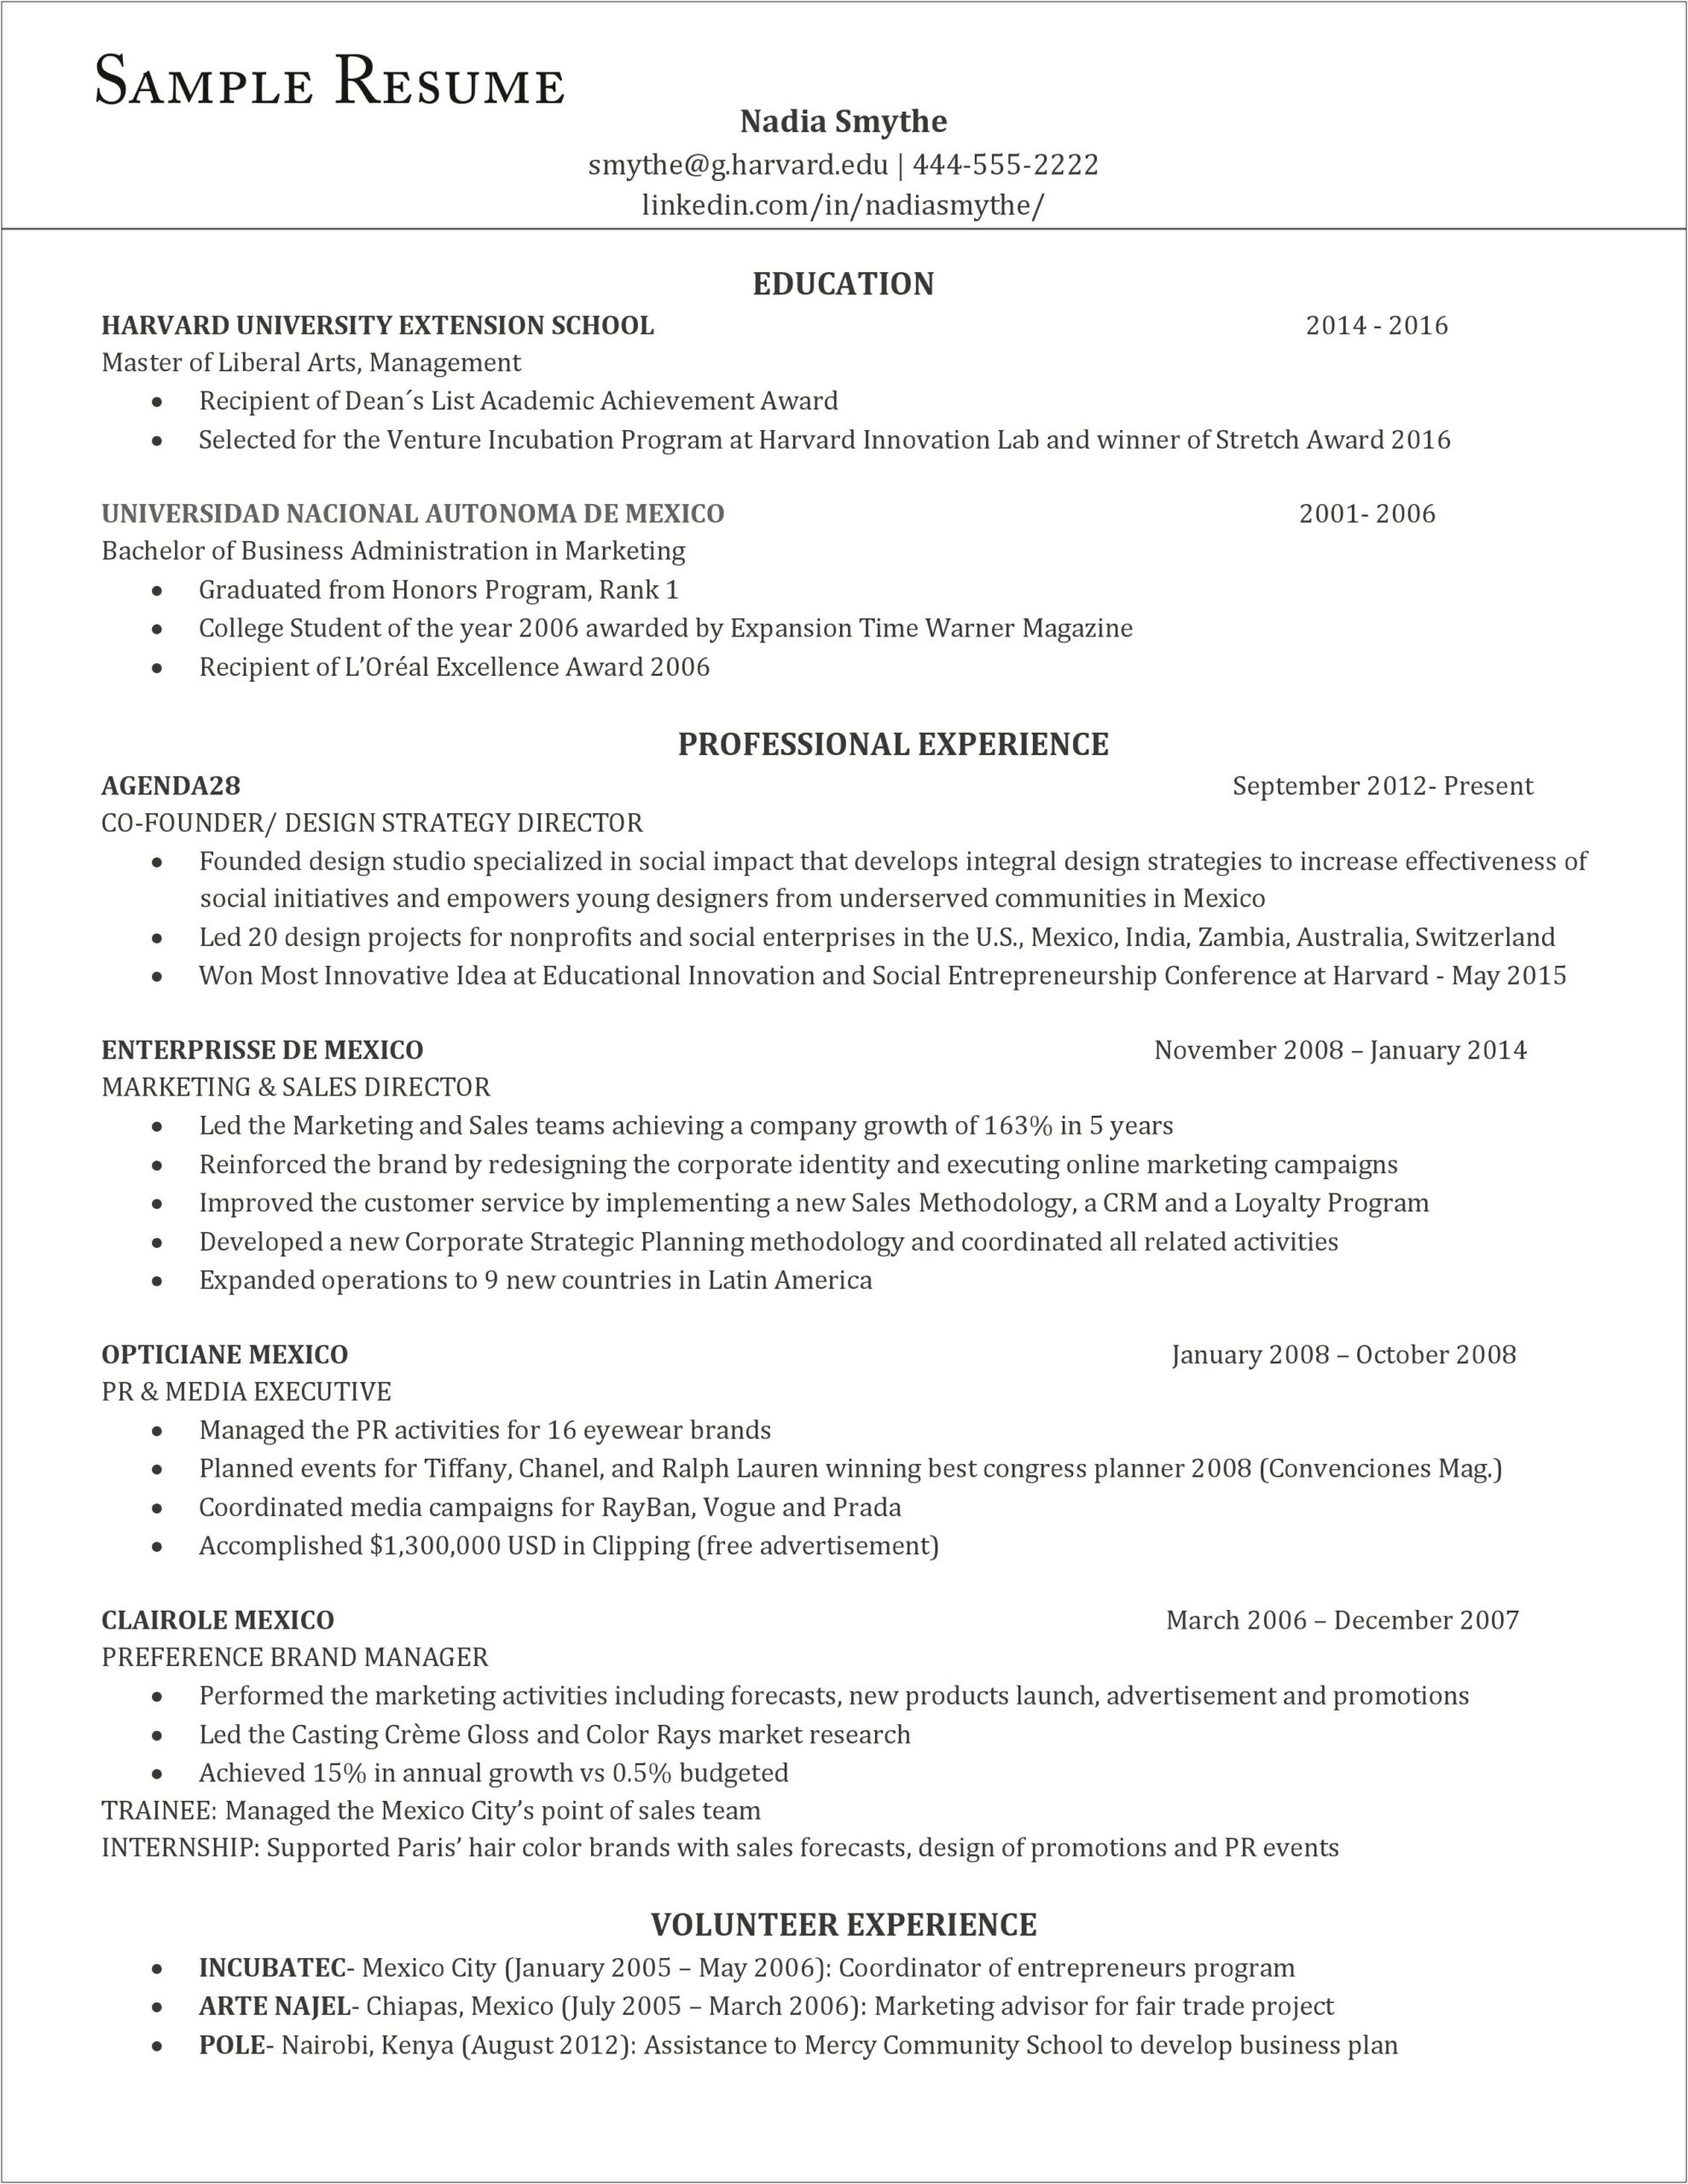 Resume Example Inclulding Conferences And Publications